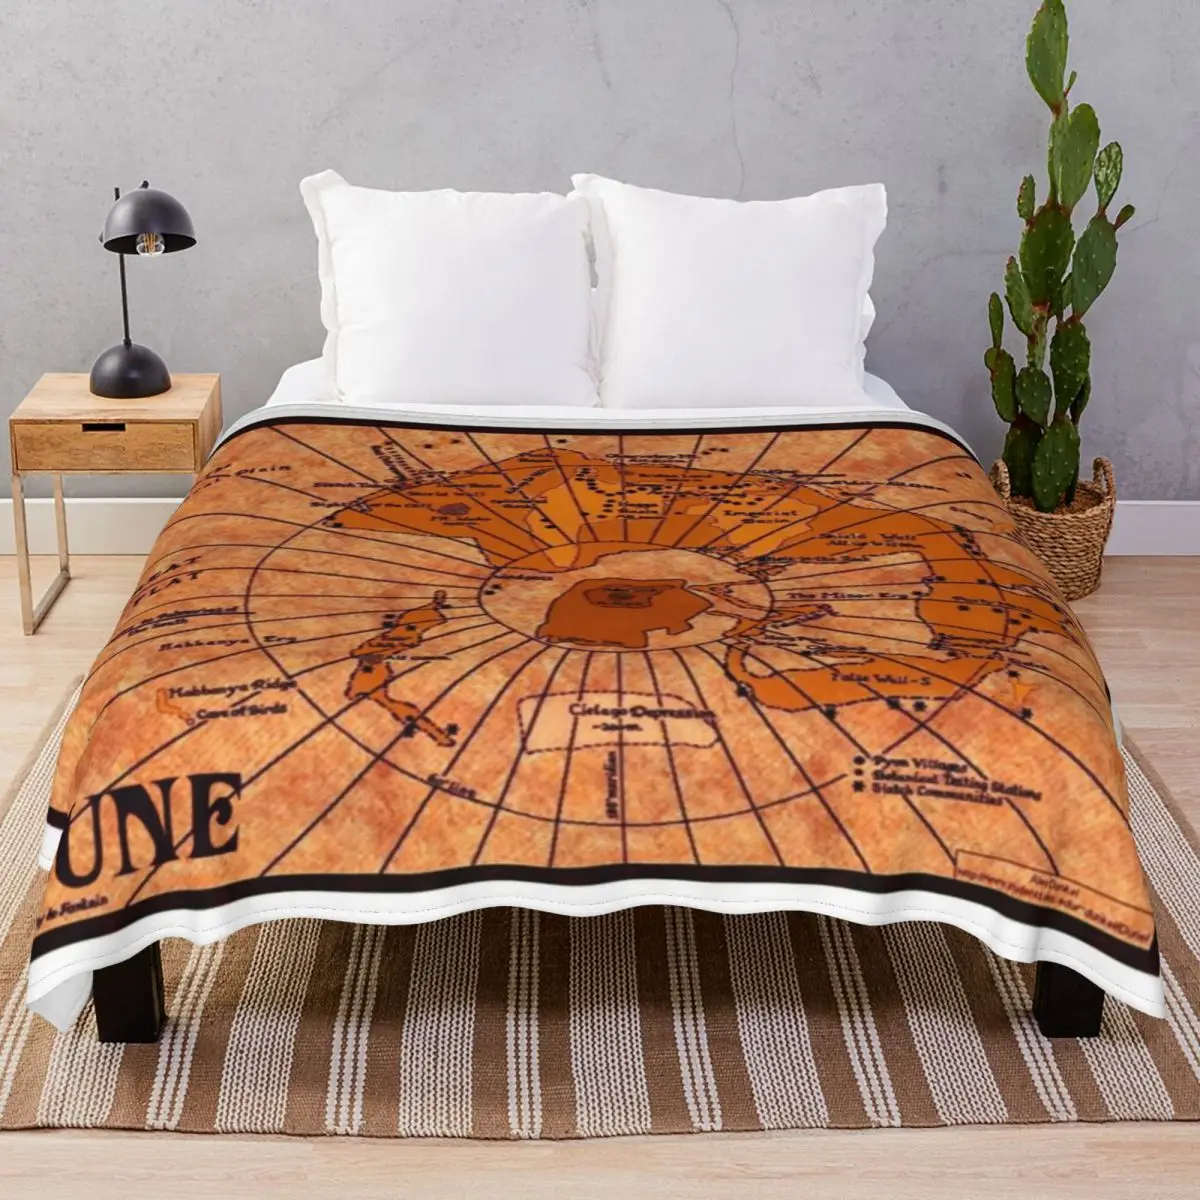 DUNE Map Blankets Flannel Plush Decoration Multifunction Throw Blanket for Bed Sofa Camp Cinema